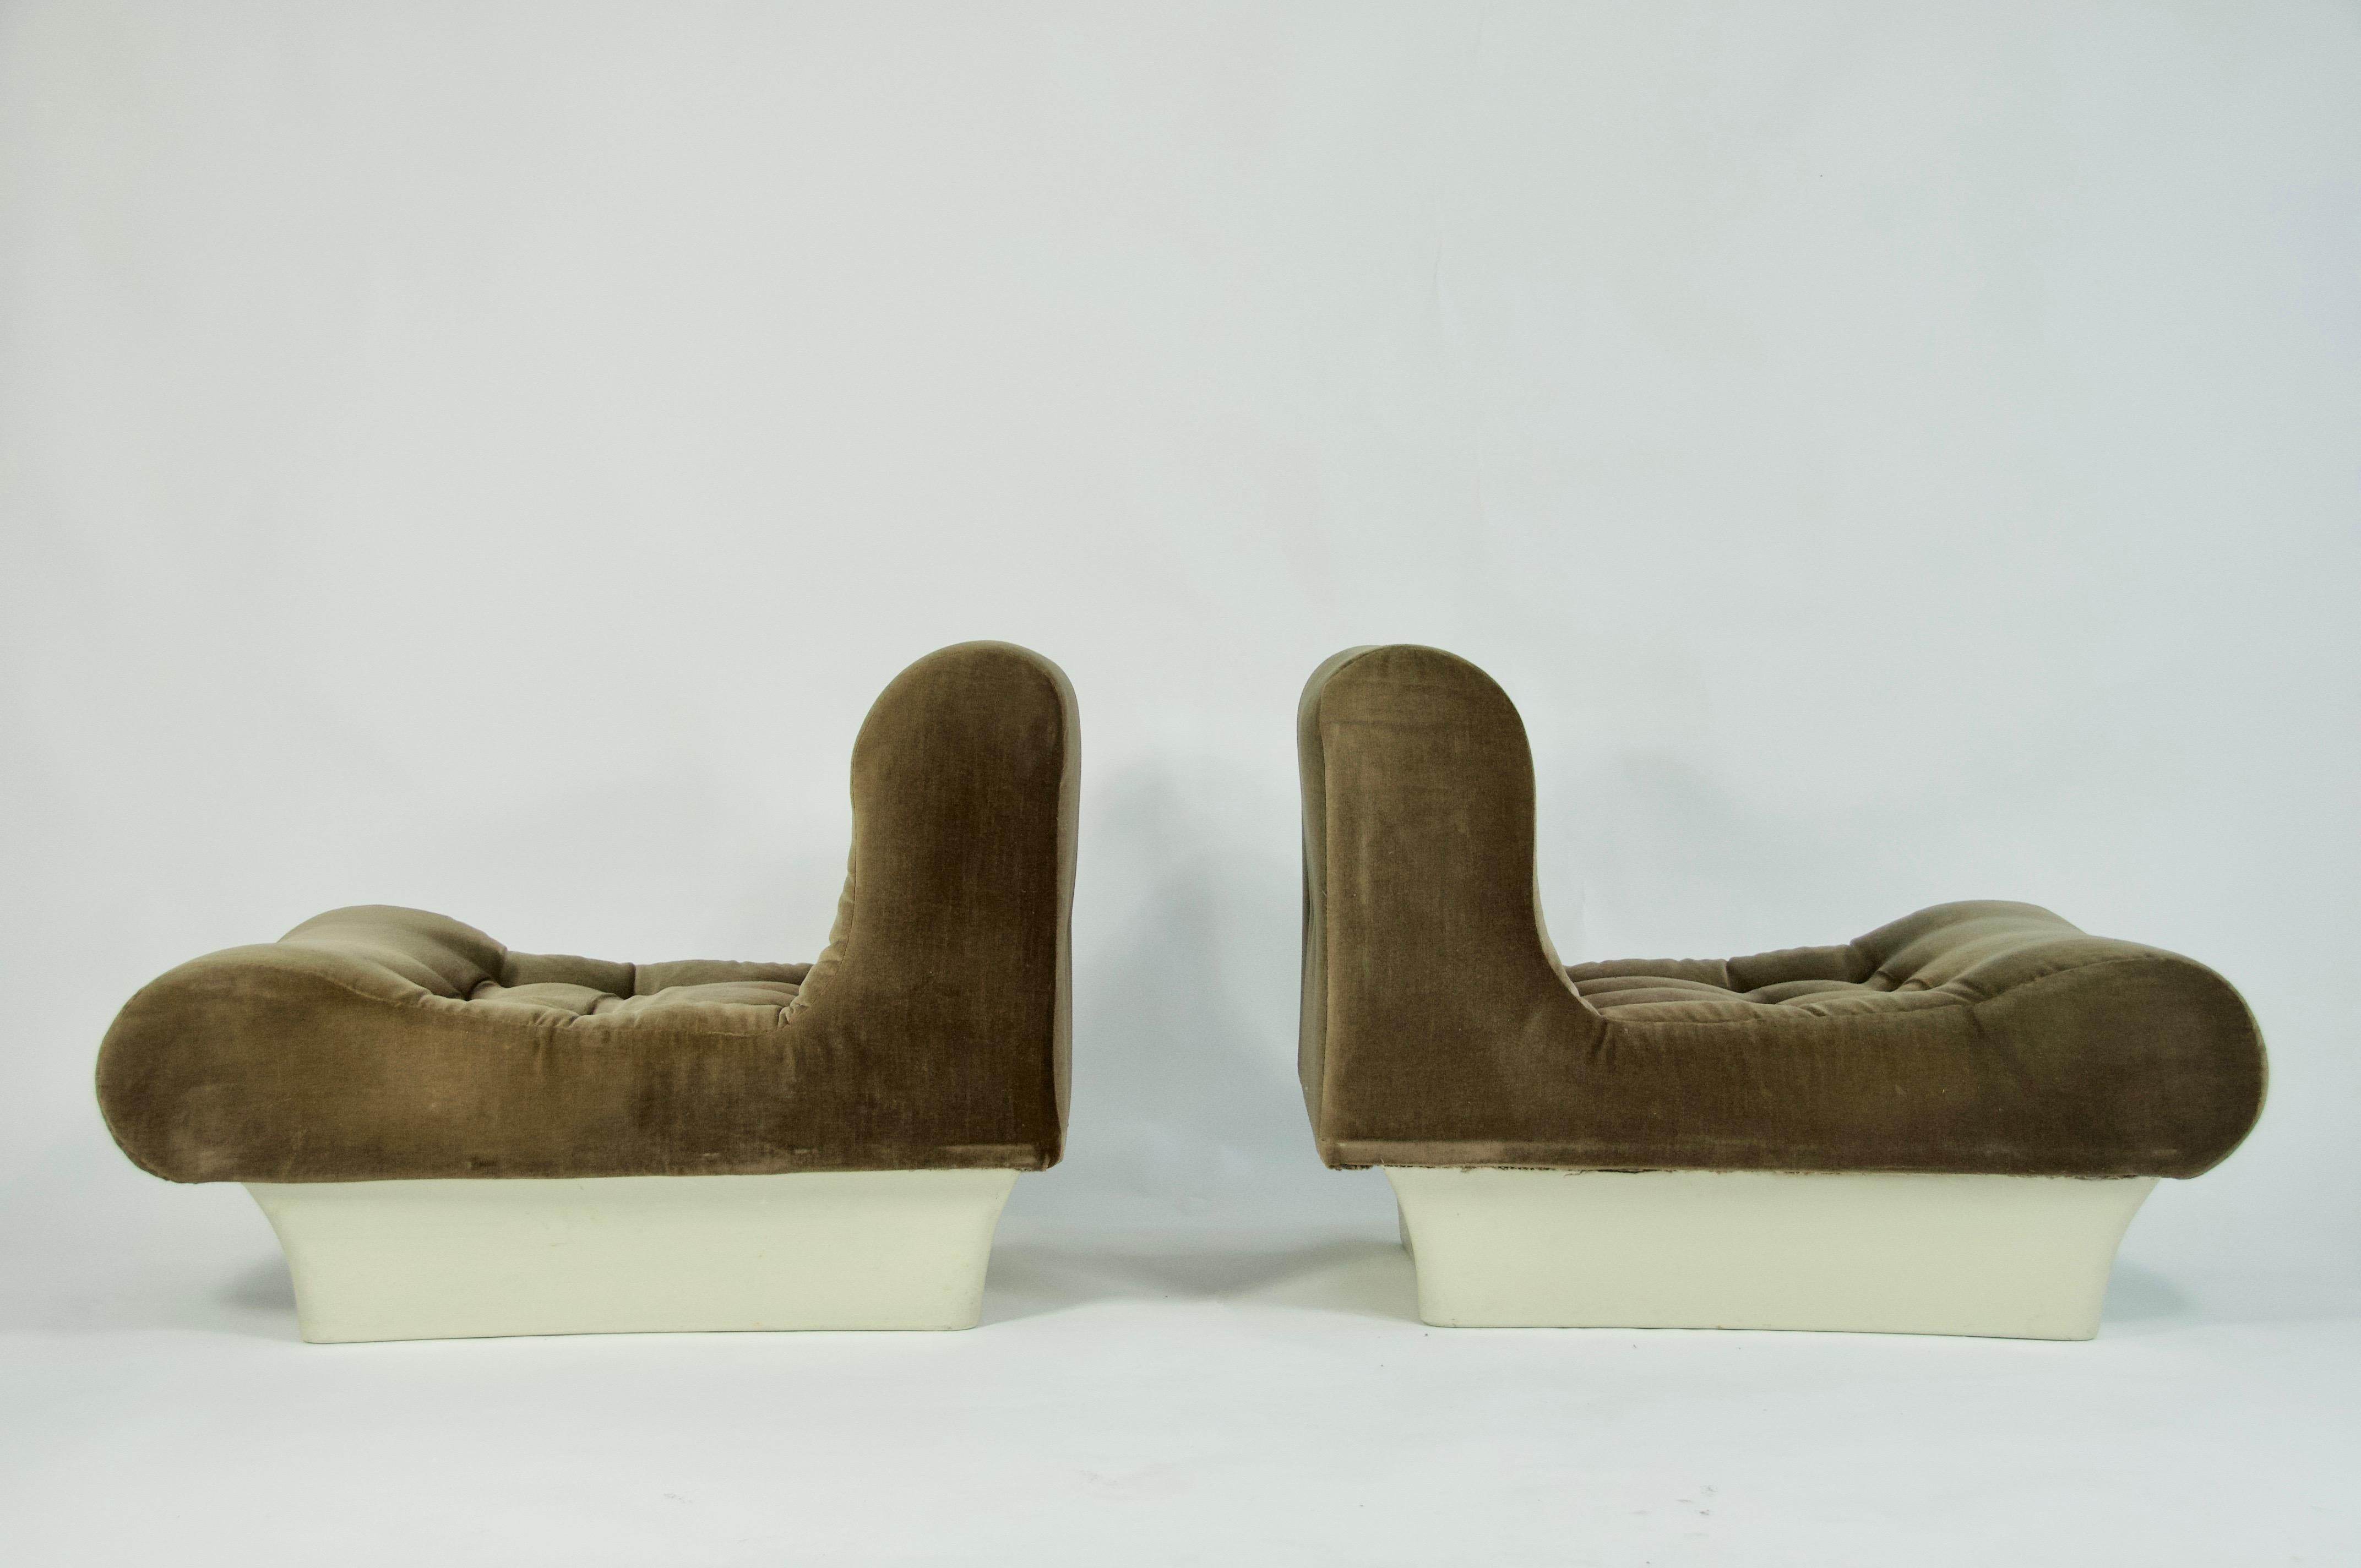 Pair of Otto Zapf lounge chairs for Vitsoe, Germany, 1967.
Sculptural low deep lounge chairs. Fiberglass base. Velvet upholstery.